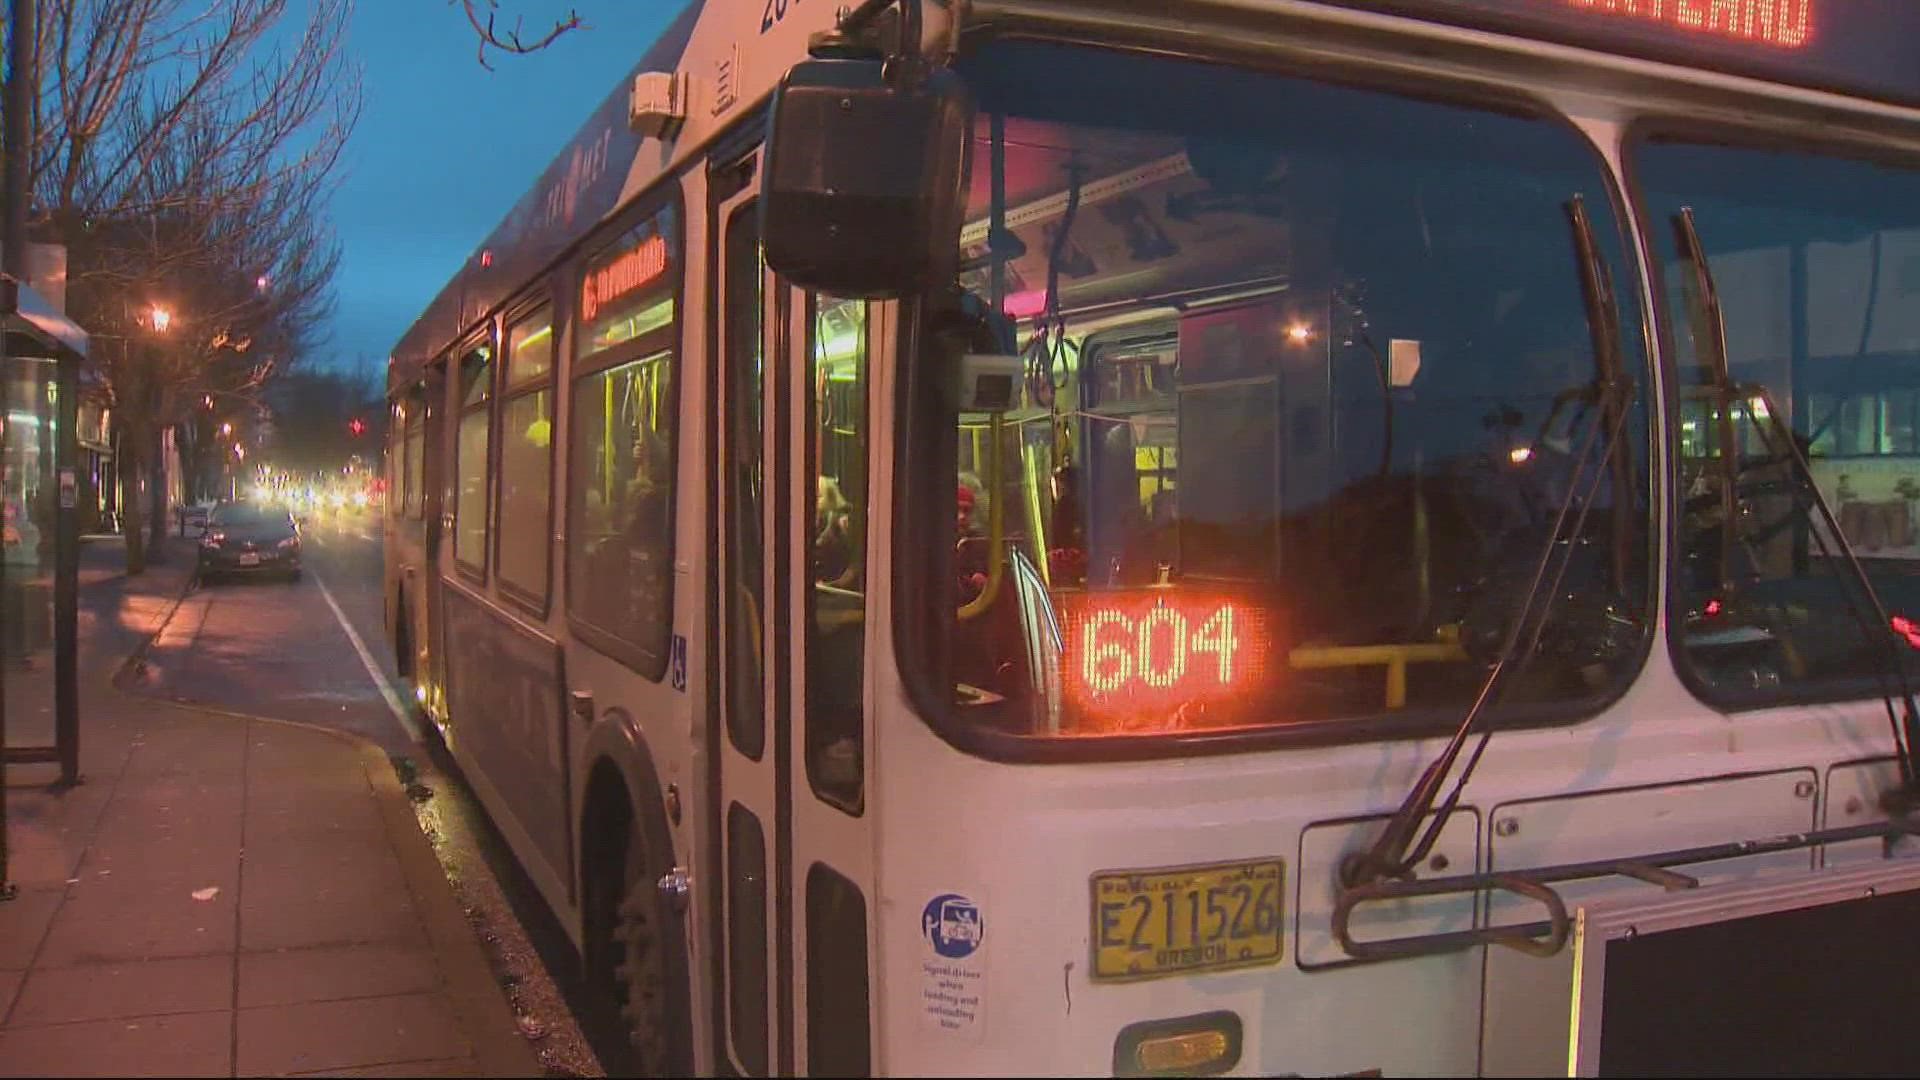 Starting in late February, riders caught spitting at or putting bodily fluids on TriMet operators will be subject to long-term exclusions, the agency said.